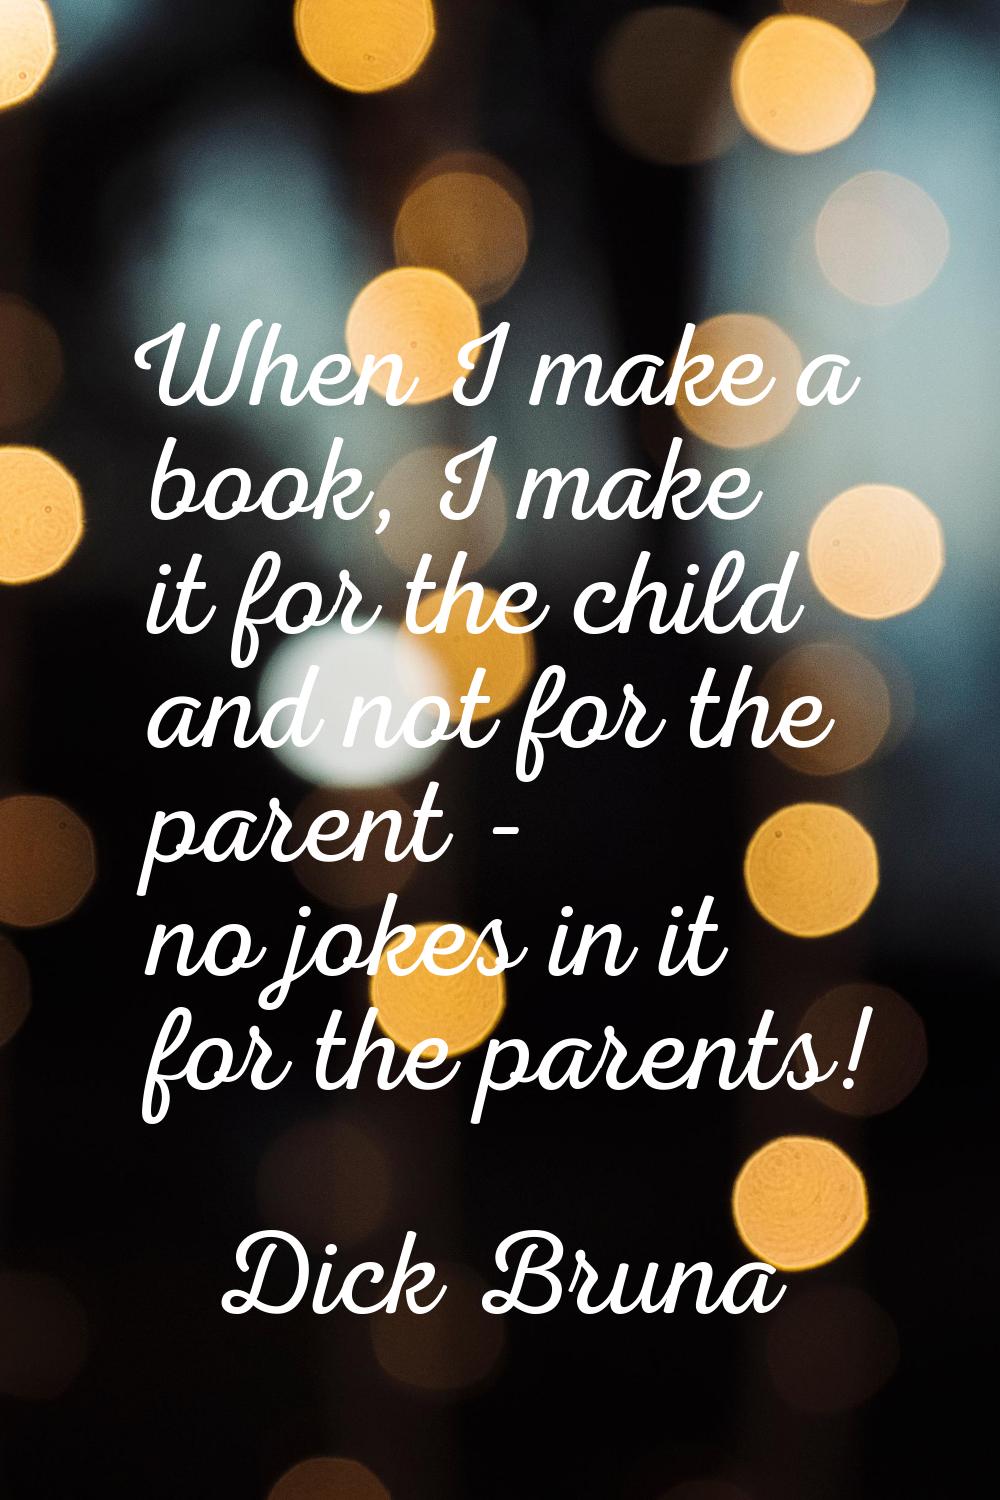 When I make a book, I make it for the child and not for the parent - no jokes in it for the parents